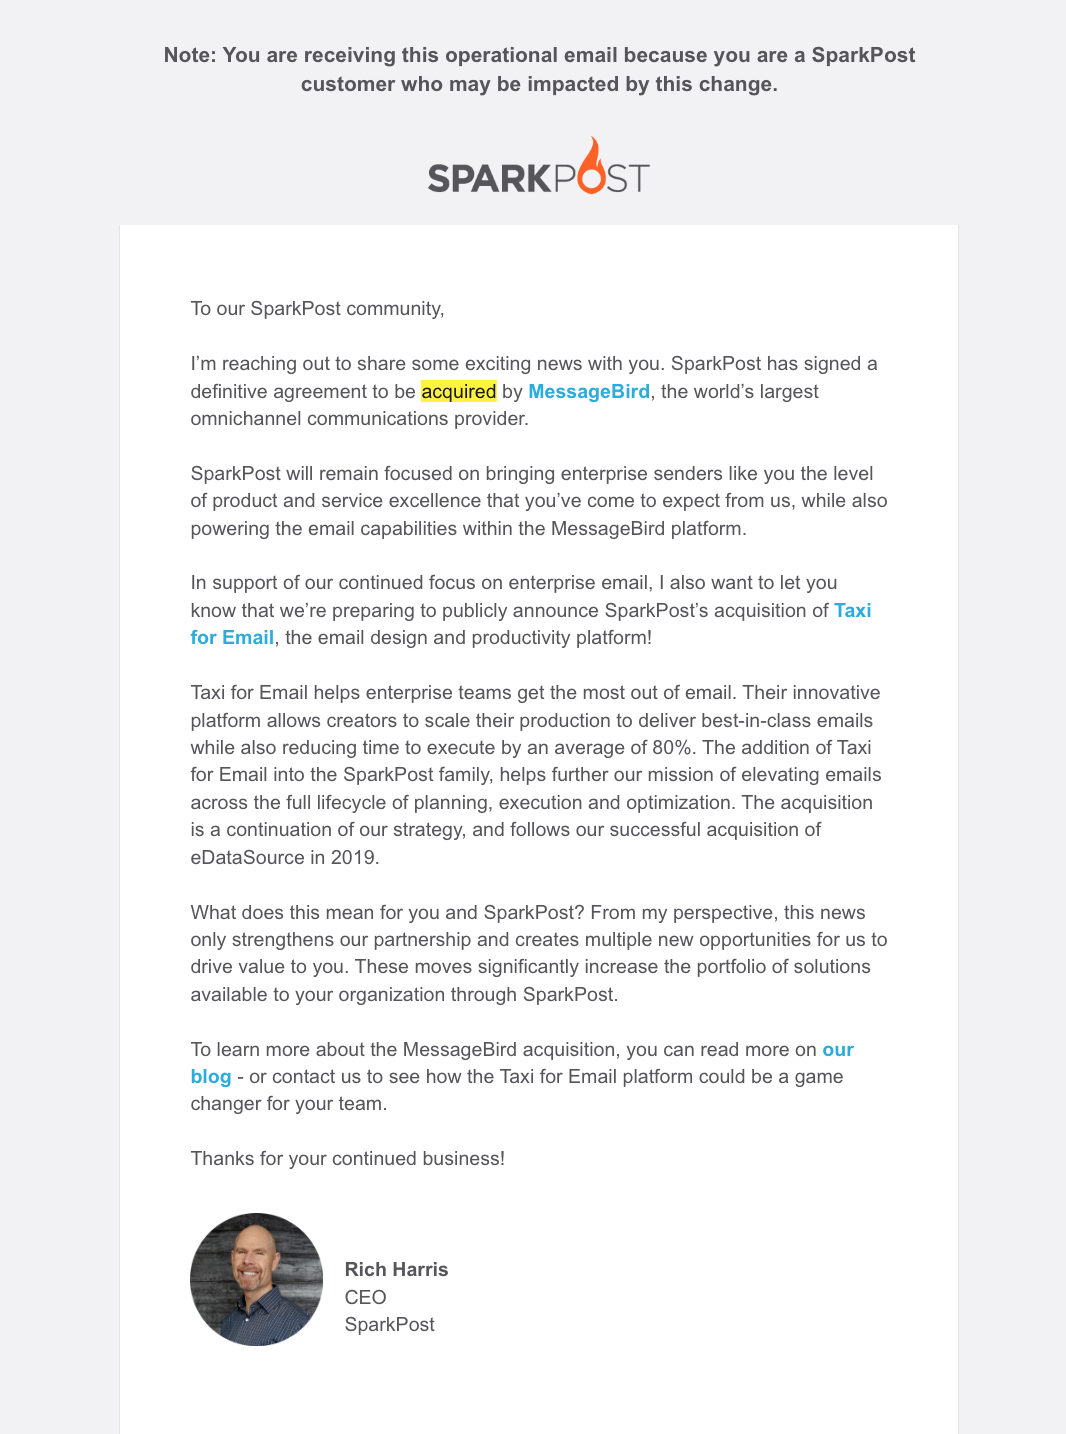 SaaS Company Acquisition Announcement Emails: Screenshot of Sparkpost's announcement email when they got acquired by MessageBird